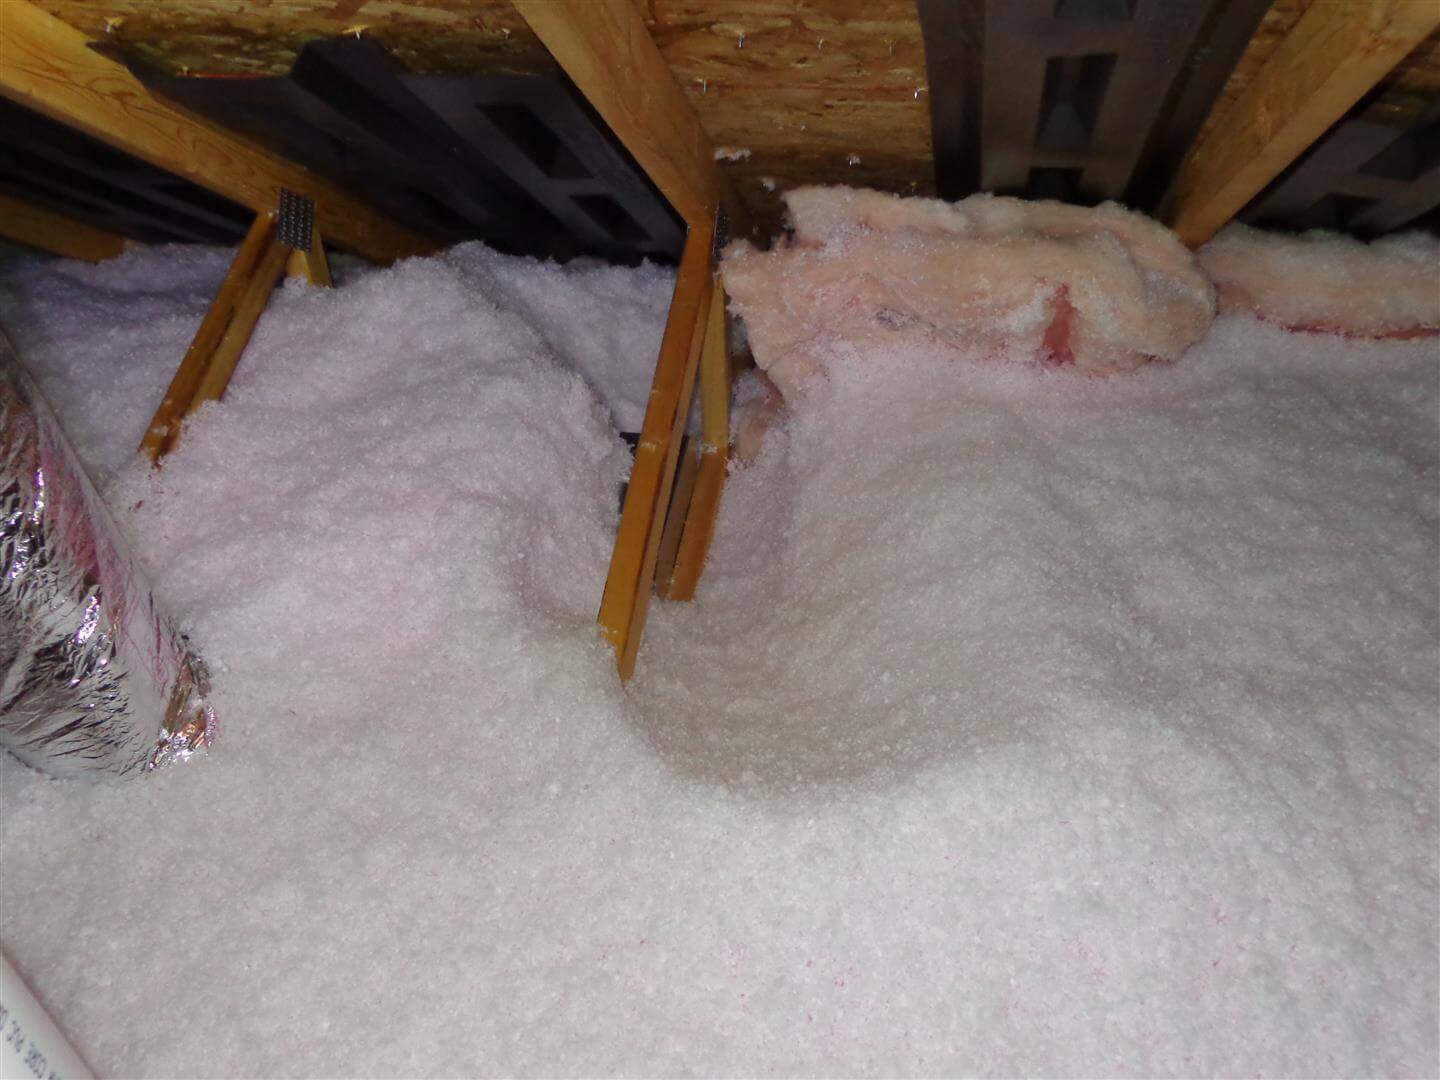 Wind washing of blown insulation in an attic can leave some areas completely uninsulated